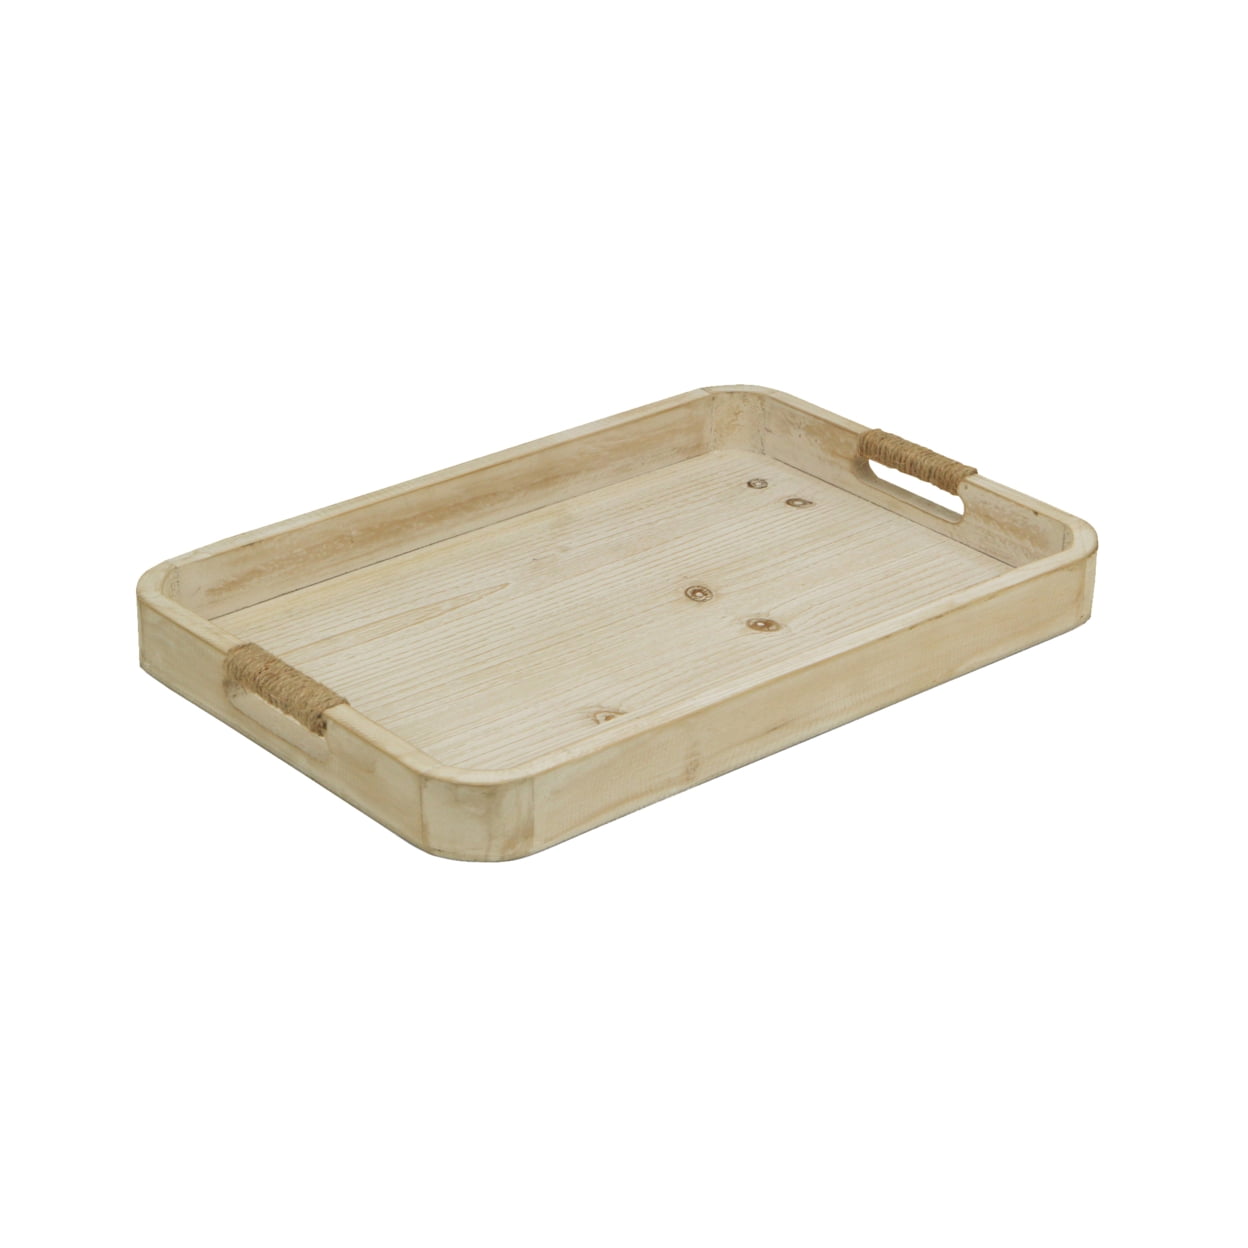 5397wt A Single, Natural Wood Tray - White Washed